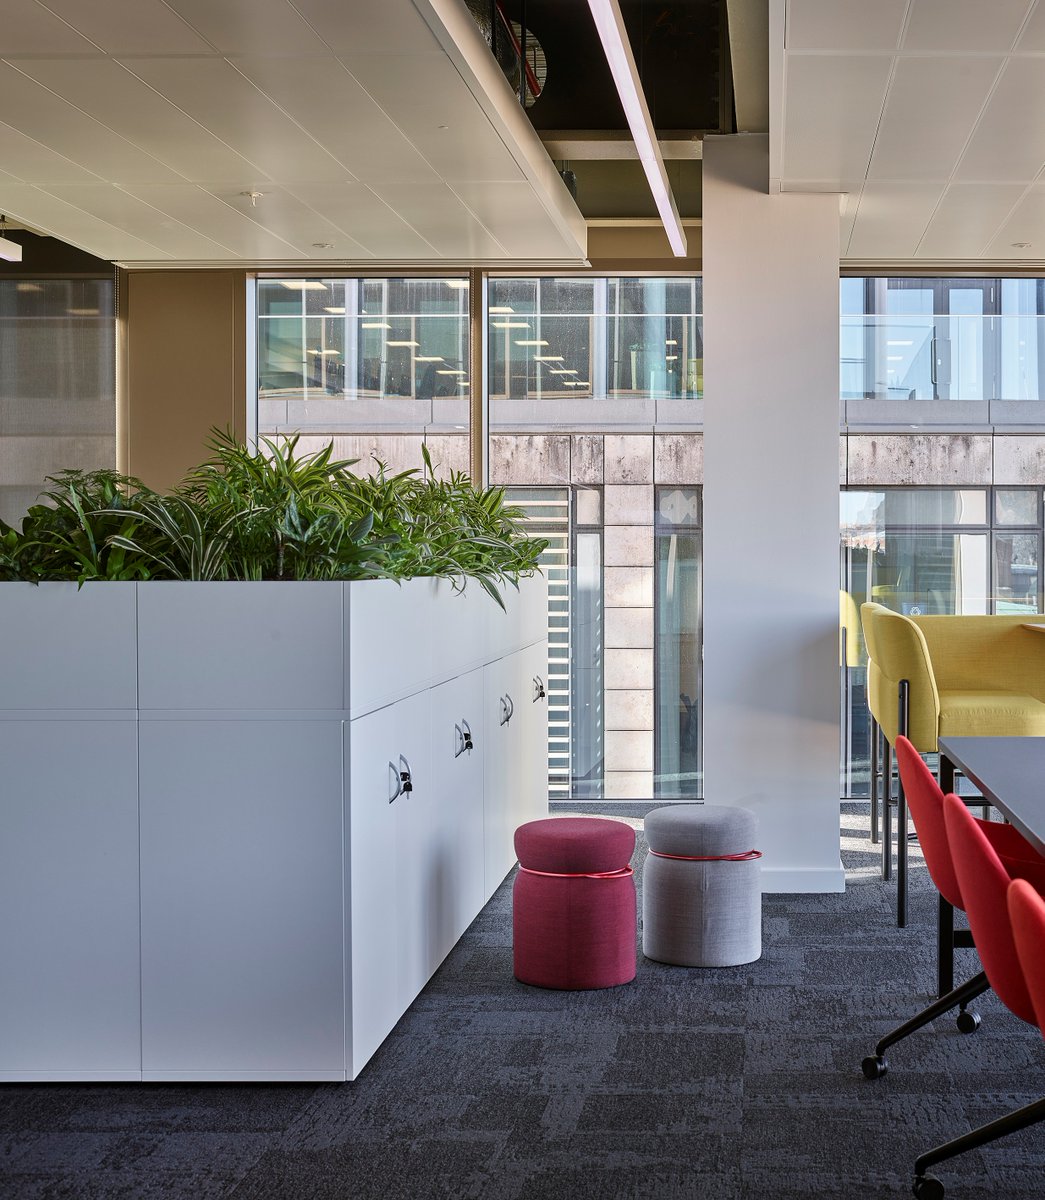 Working in collaboration with @MLA_Ltd and @YourBureau, we were delighted to offer planting solutions for @BrodiesLLP ahead of their big move to Capital Square (winner of Best Commercial Workplace at the @BCO_UK Awards 2022).

“Promoting well-being at work was key to the success…